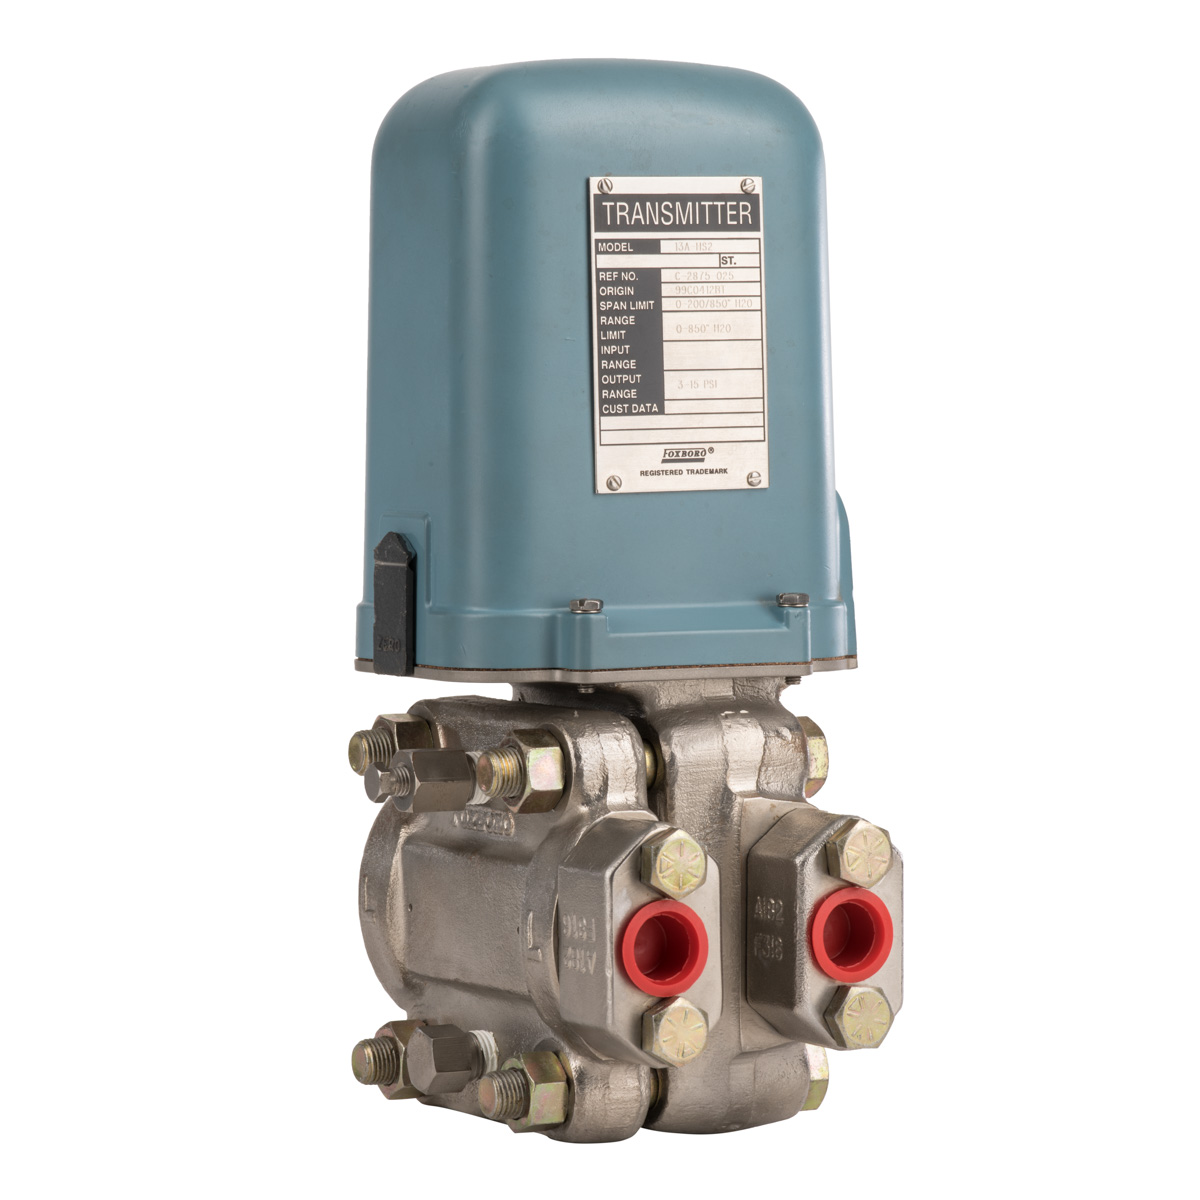 Foxboro 13A1 Differential Pressure Transmitter 3-15 PSI for sale online 